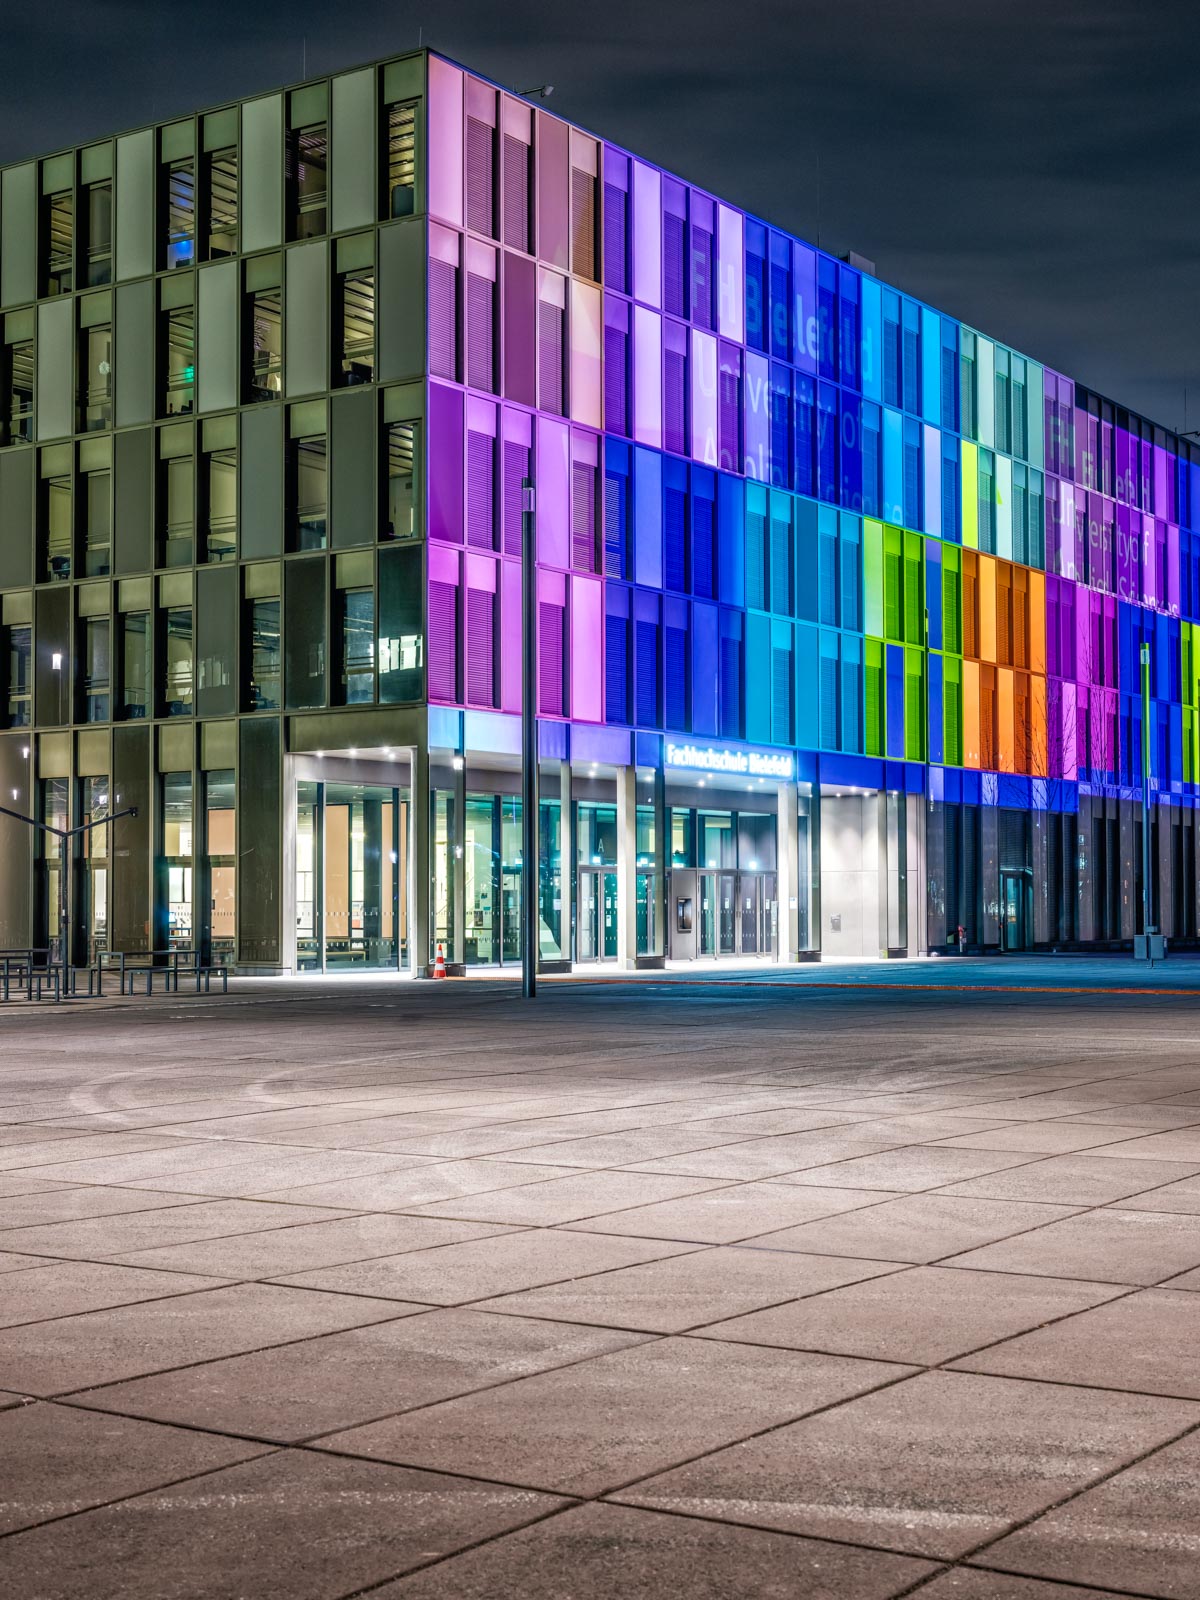 Illuminated building of the University of Applied Sciences Bielefeld on the occasion of its 50th anniversary (Germany).